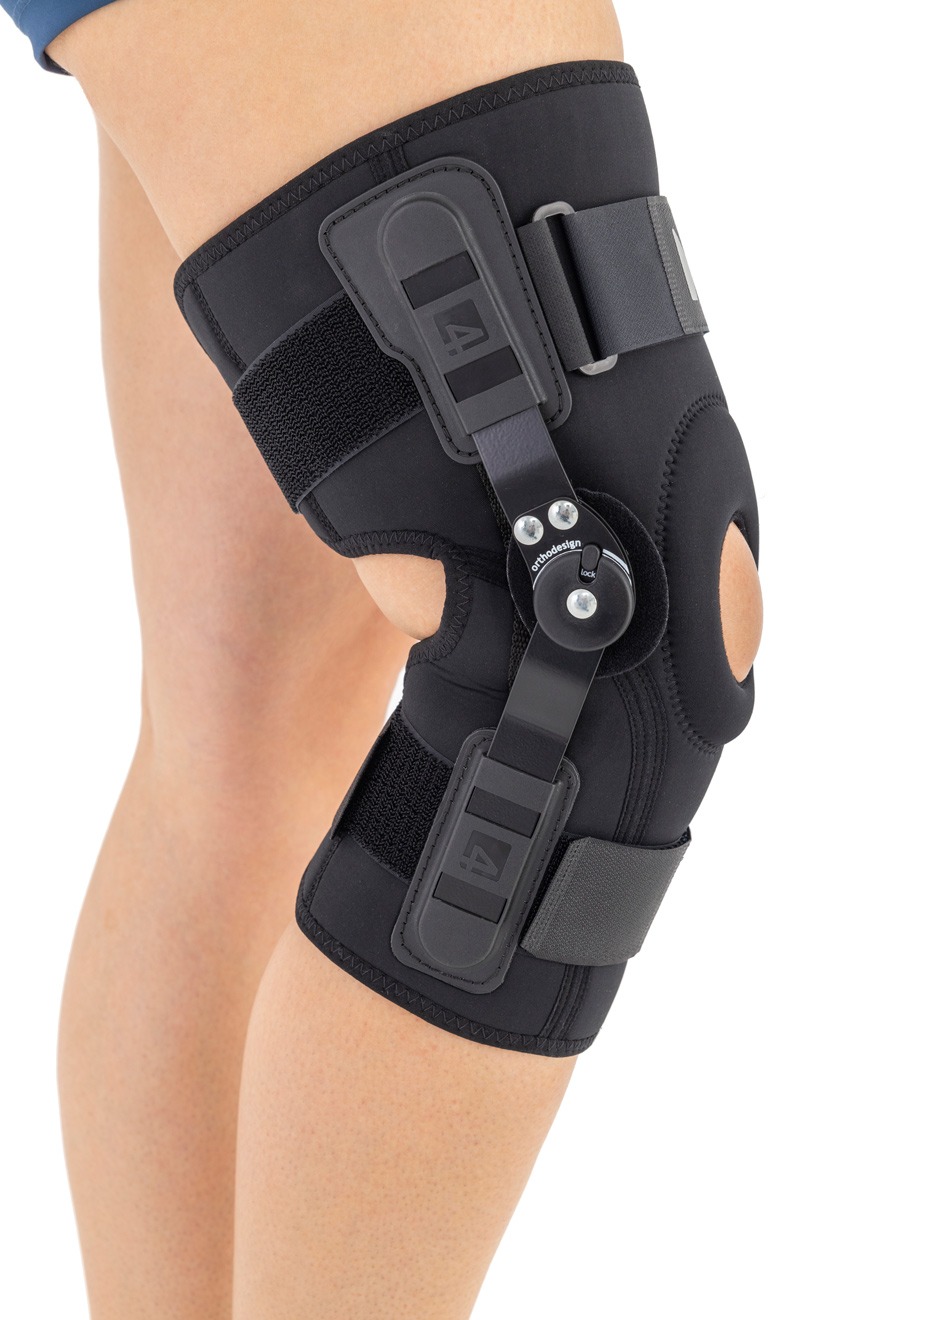 Lower limb support OKD-04  Reh4Mat – lower limb orthosis and braces -  Manufacturer of modern orthopaedic devices